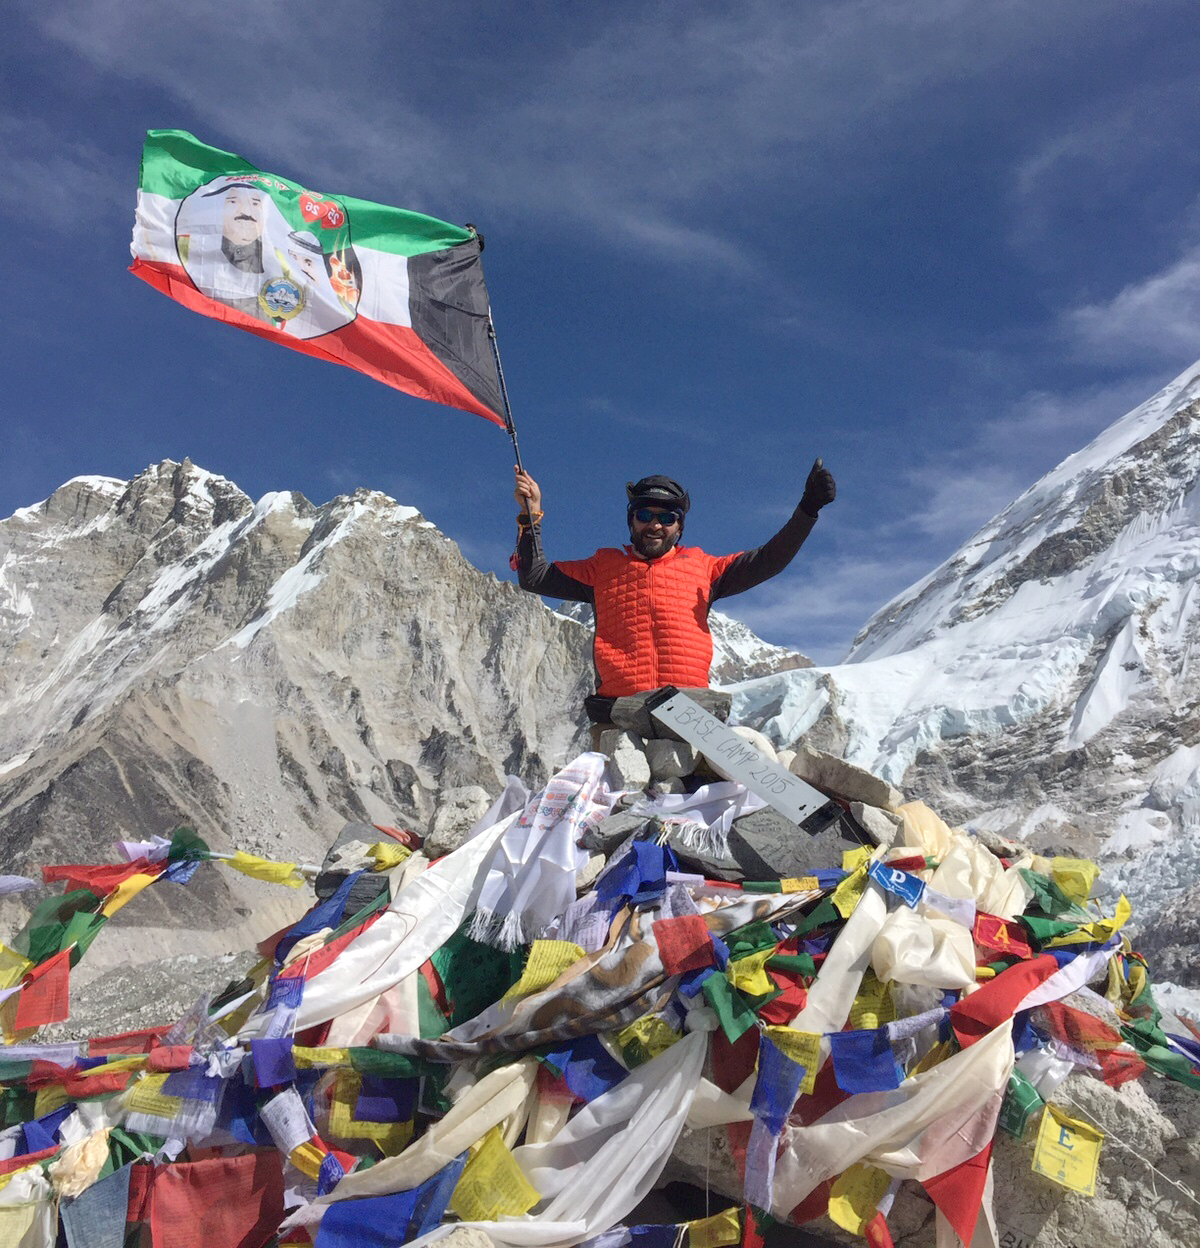 Kuwaiti mountaineer Fuad Qabazard succeeded in climbing Mount Everest and raised Kuwait Flag and pictures of His Highness the Amir Sheikh Sabah Al-Ahmad Al-Jaber Al-Sabah and His Highness the Crown Prince Sheikh Nawaf Al-Ahmad Al-Jaber Al-Sabah